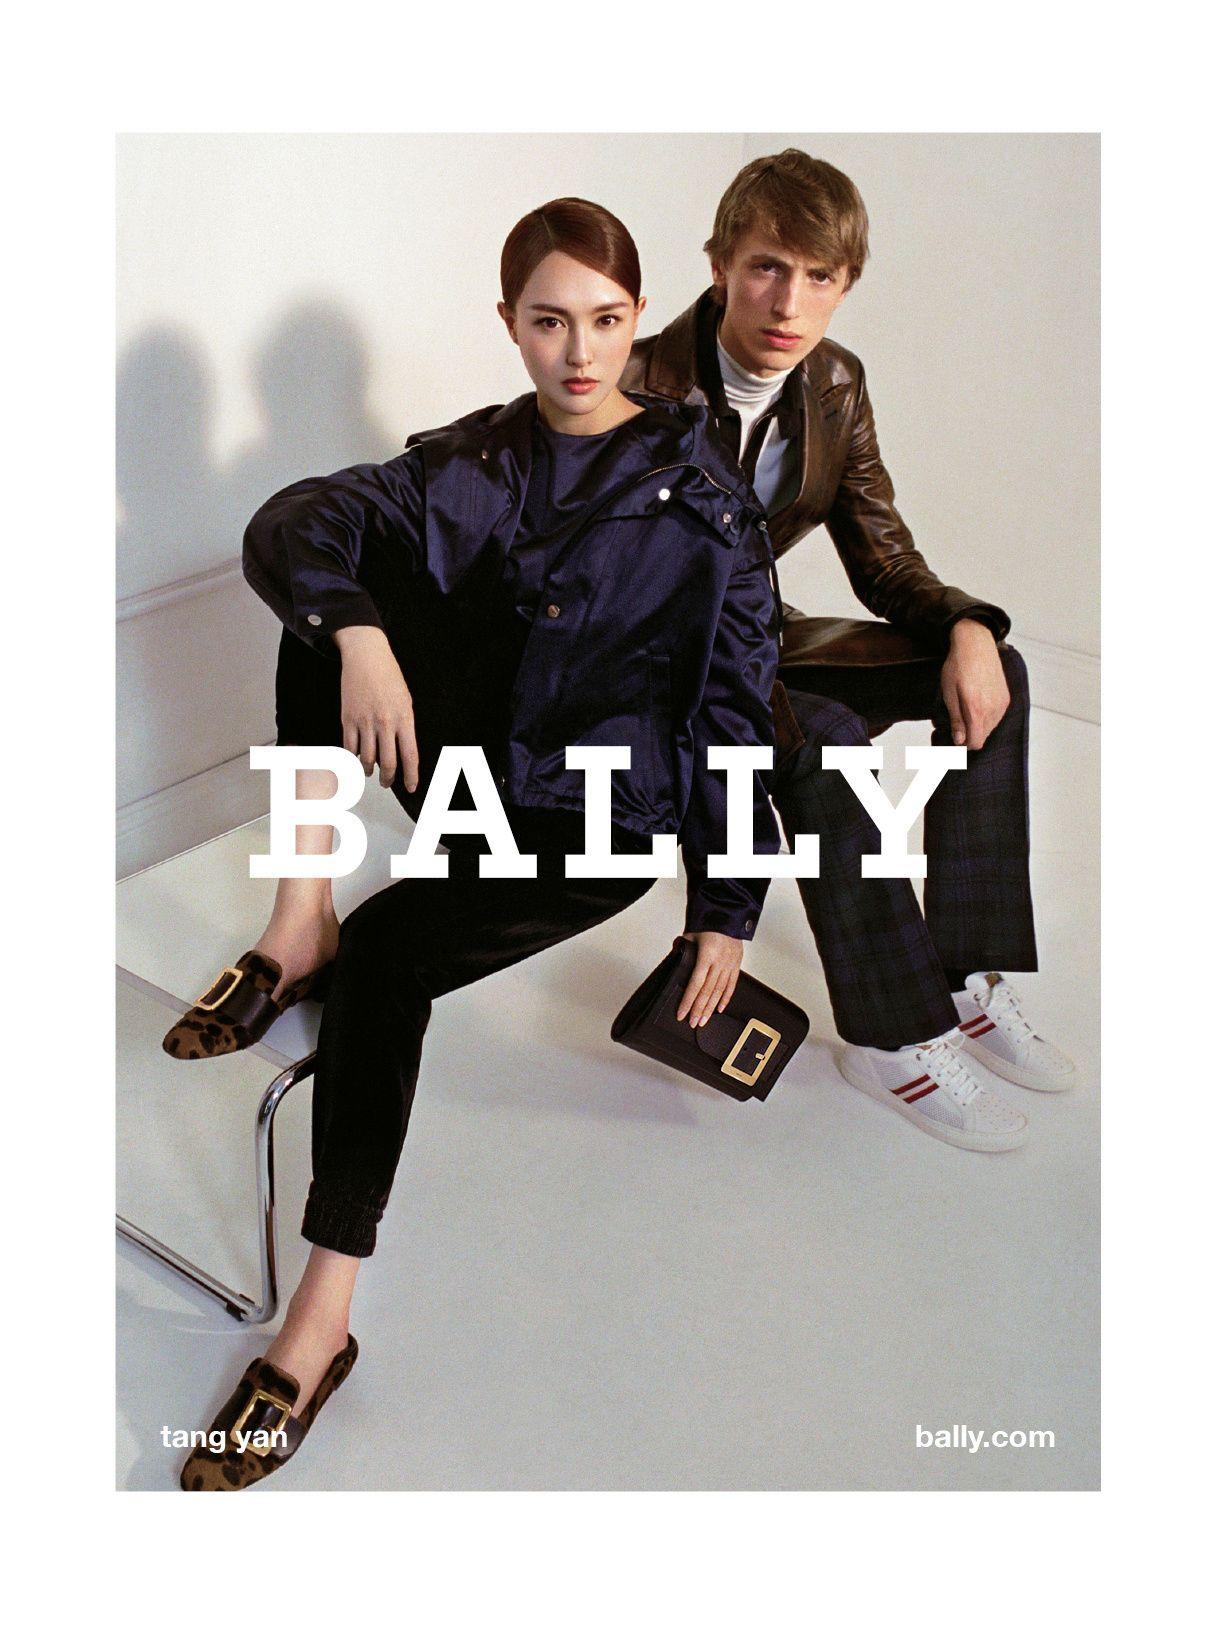 Bally Fashion Logo - First Look: Bally's Fall/Winter 17 FULL Ad Campaign With Tang Yan ...